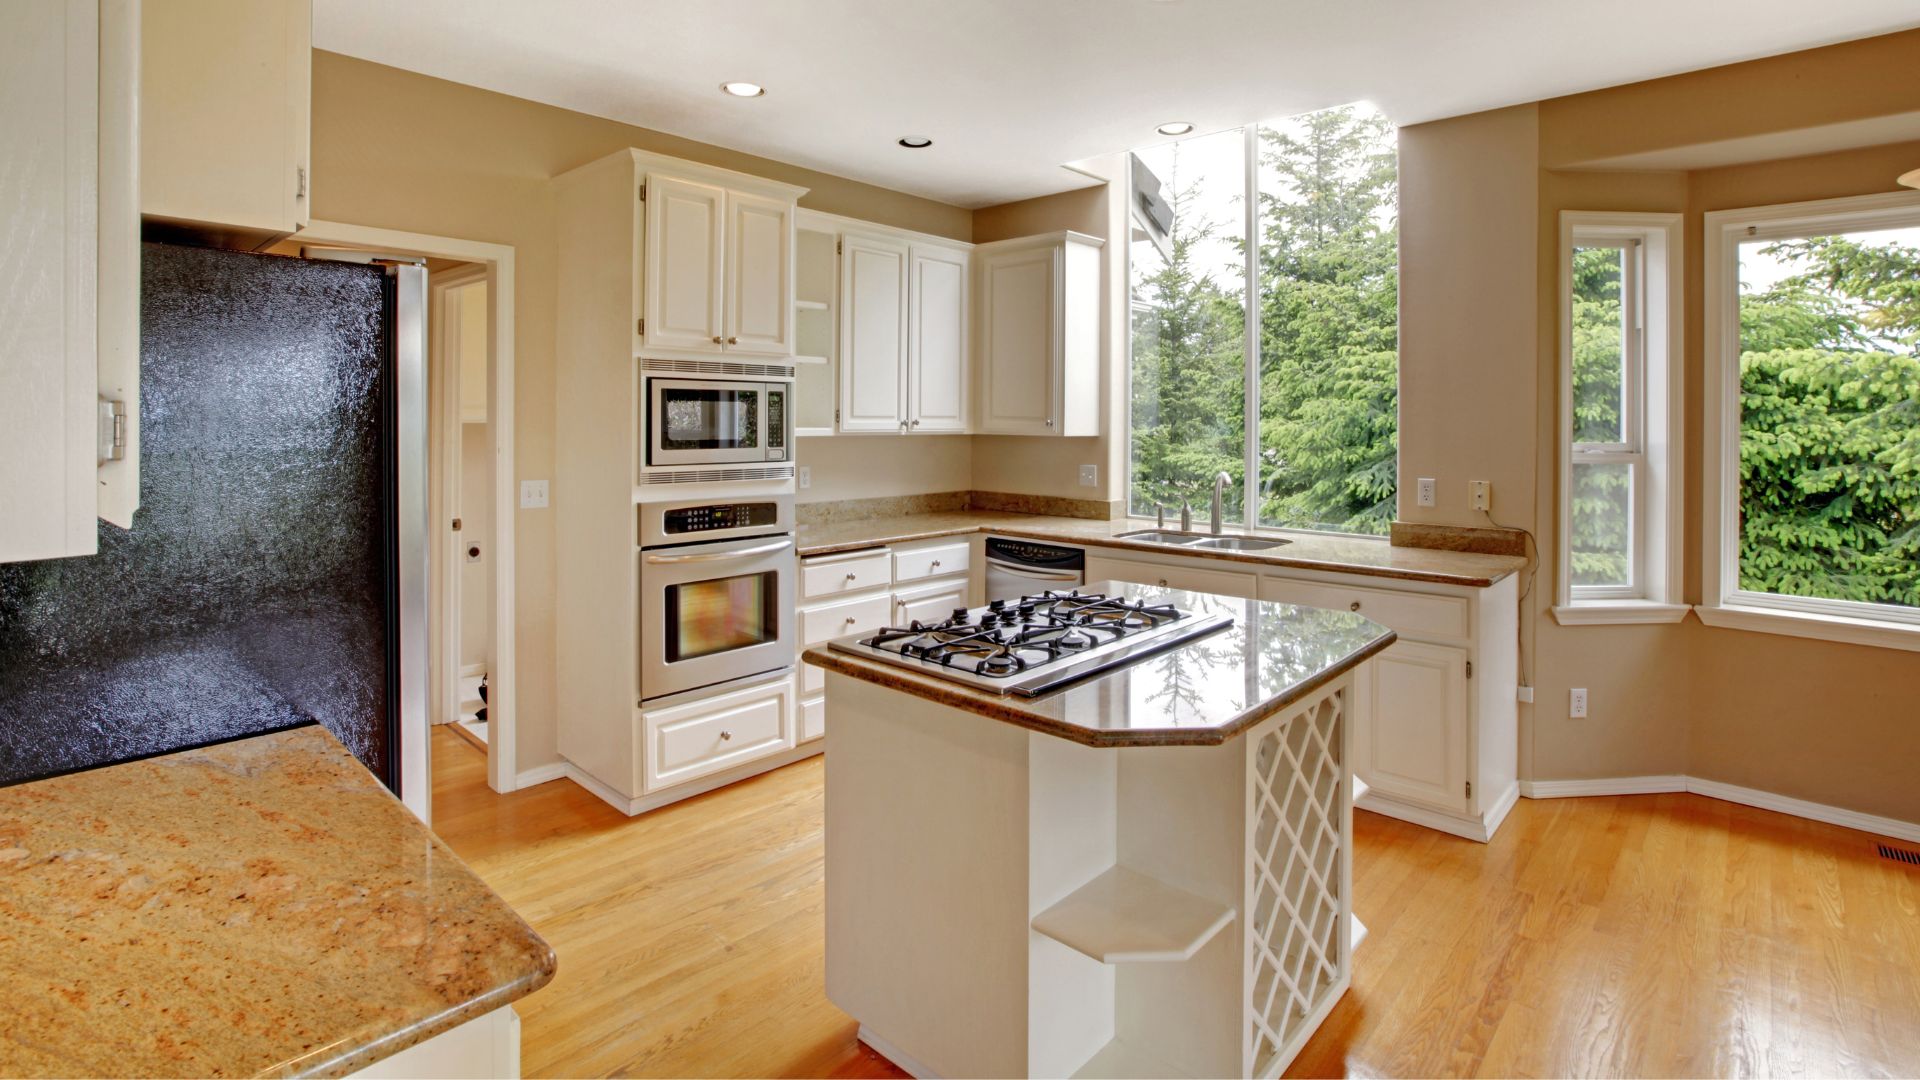 Beadboard-Cabinets-in-a-White-and-Wood-Kitchen.jpg